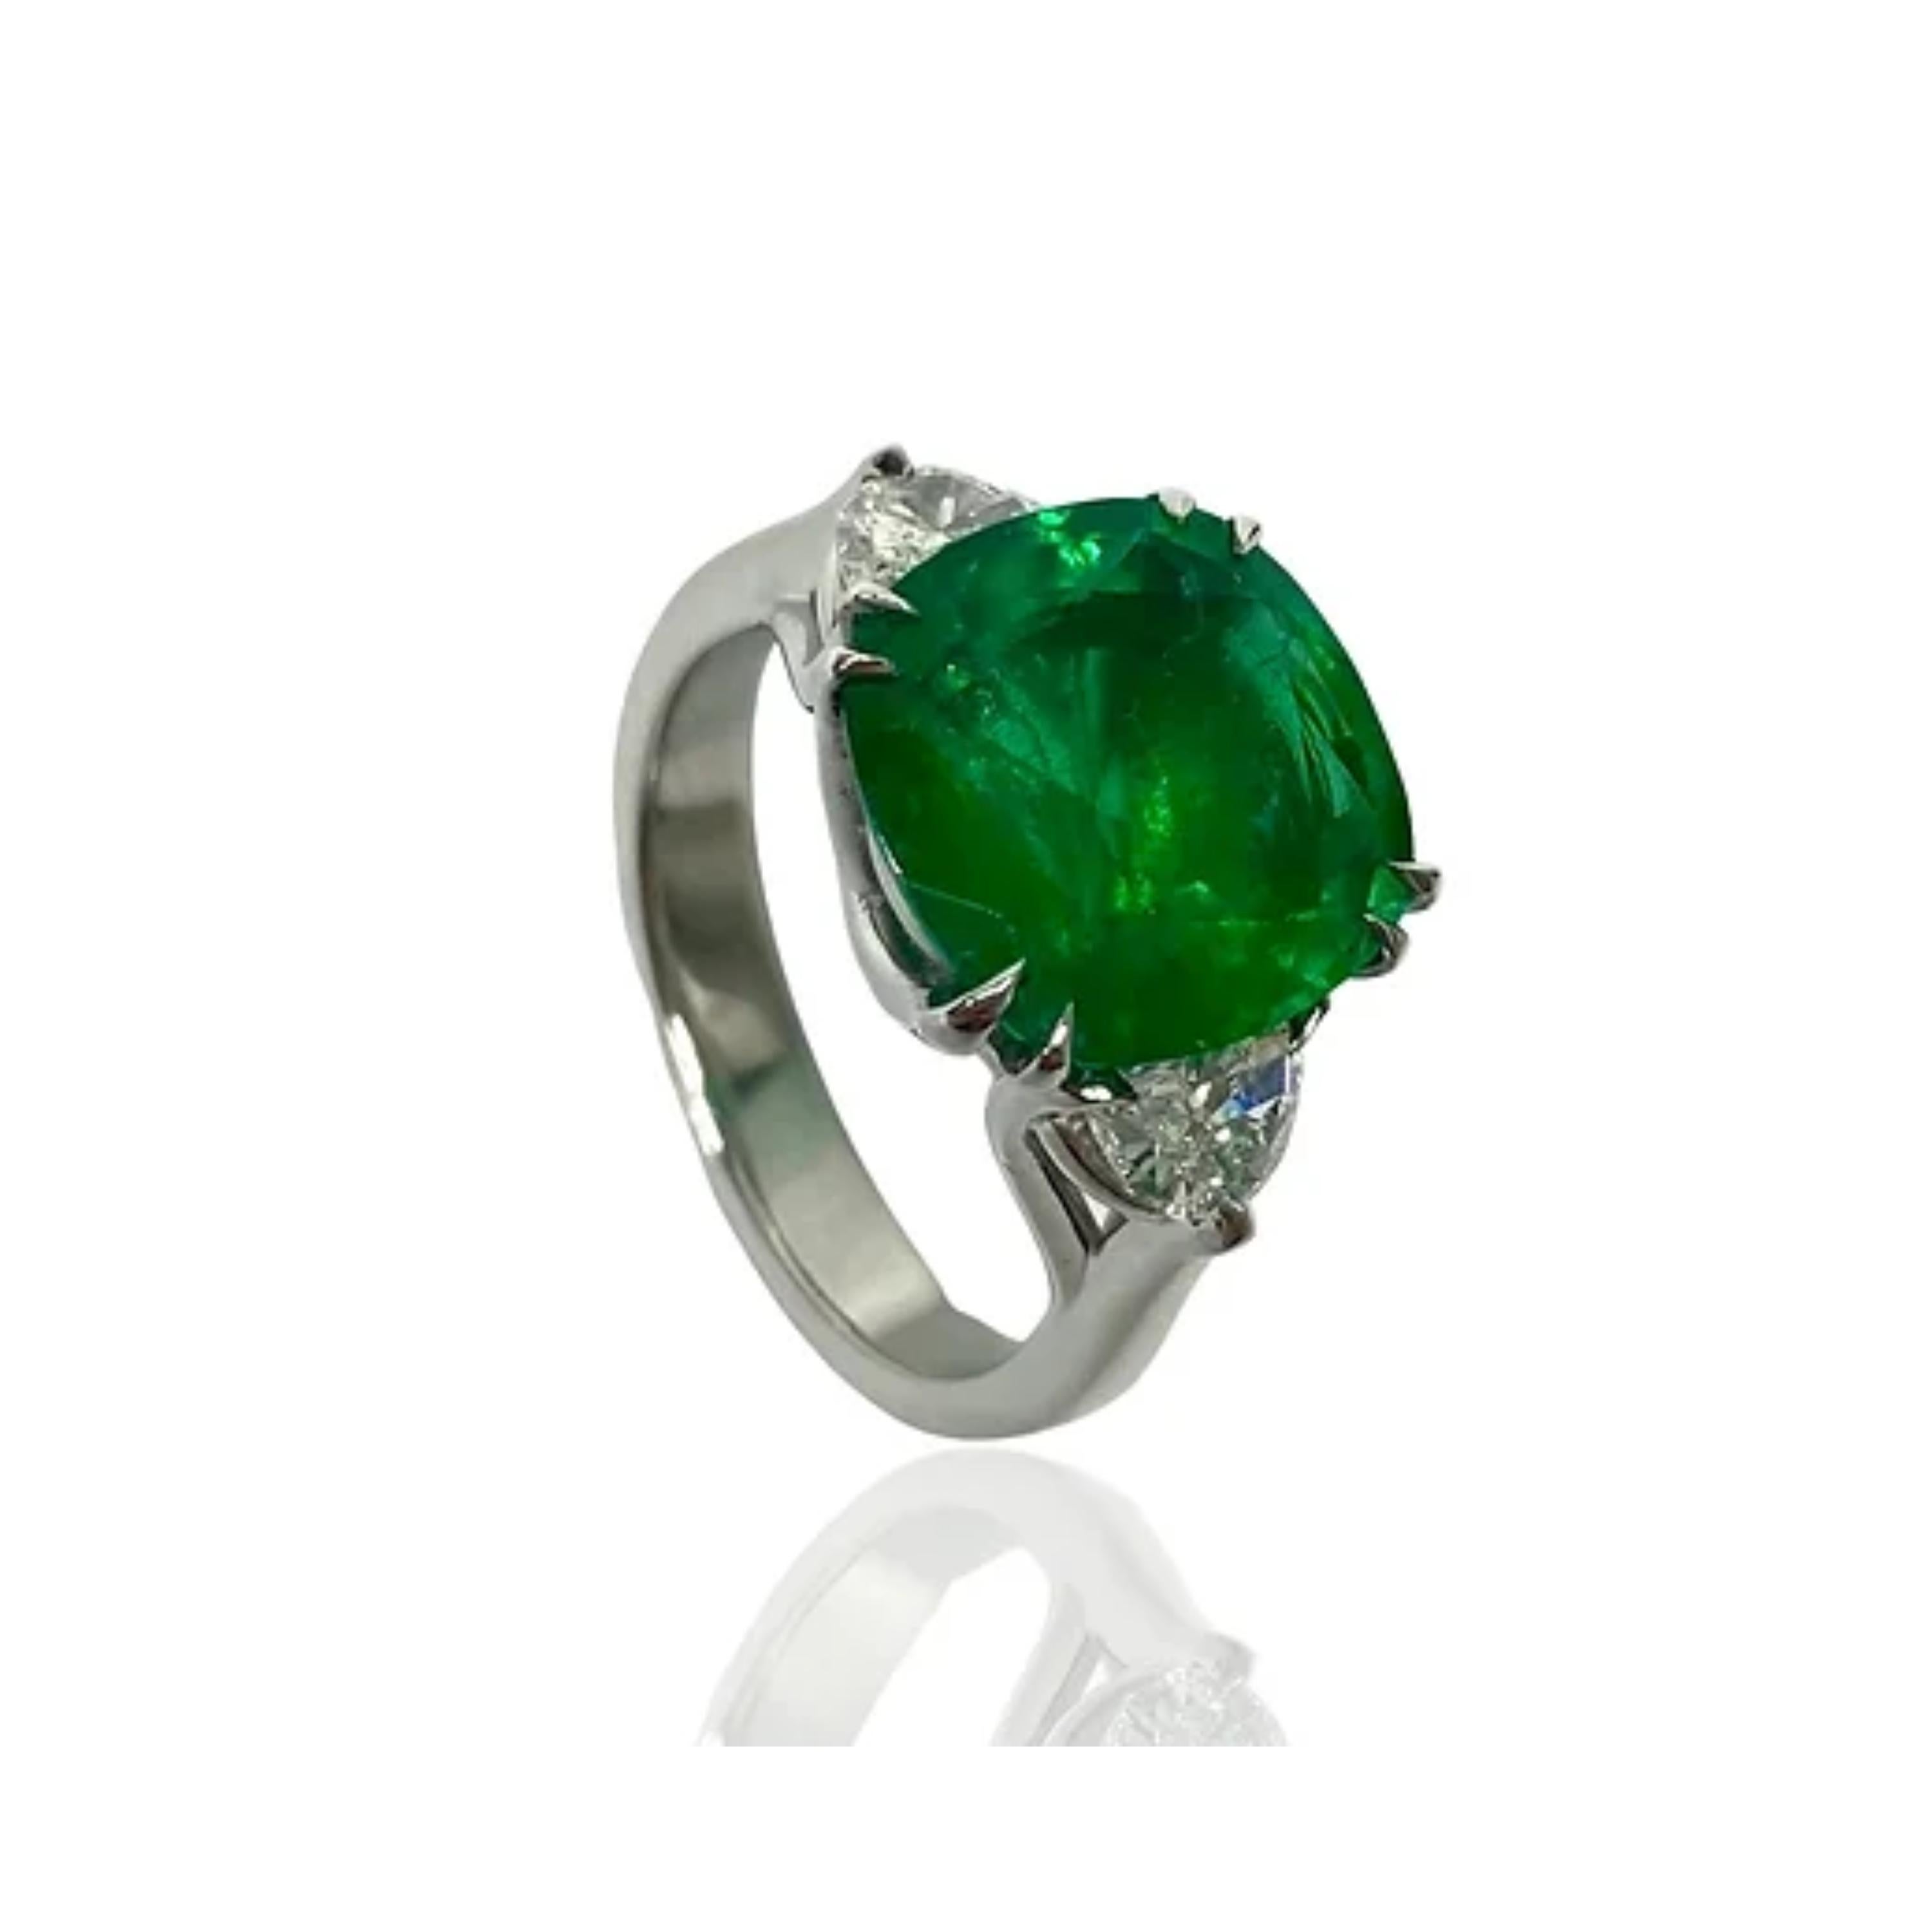 For Sale:  Art Deco 6 CT Natural Emerald Diamond Engagement Ring in 18k Gold, Cocktail Ring 5